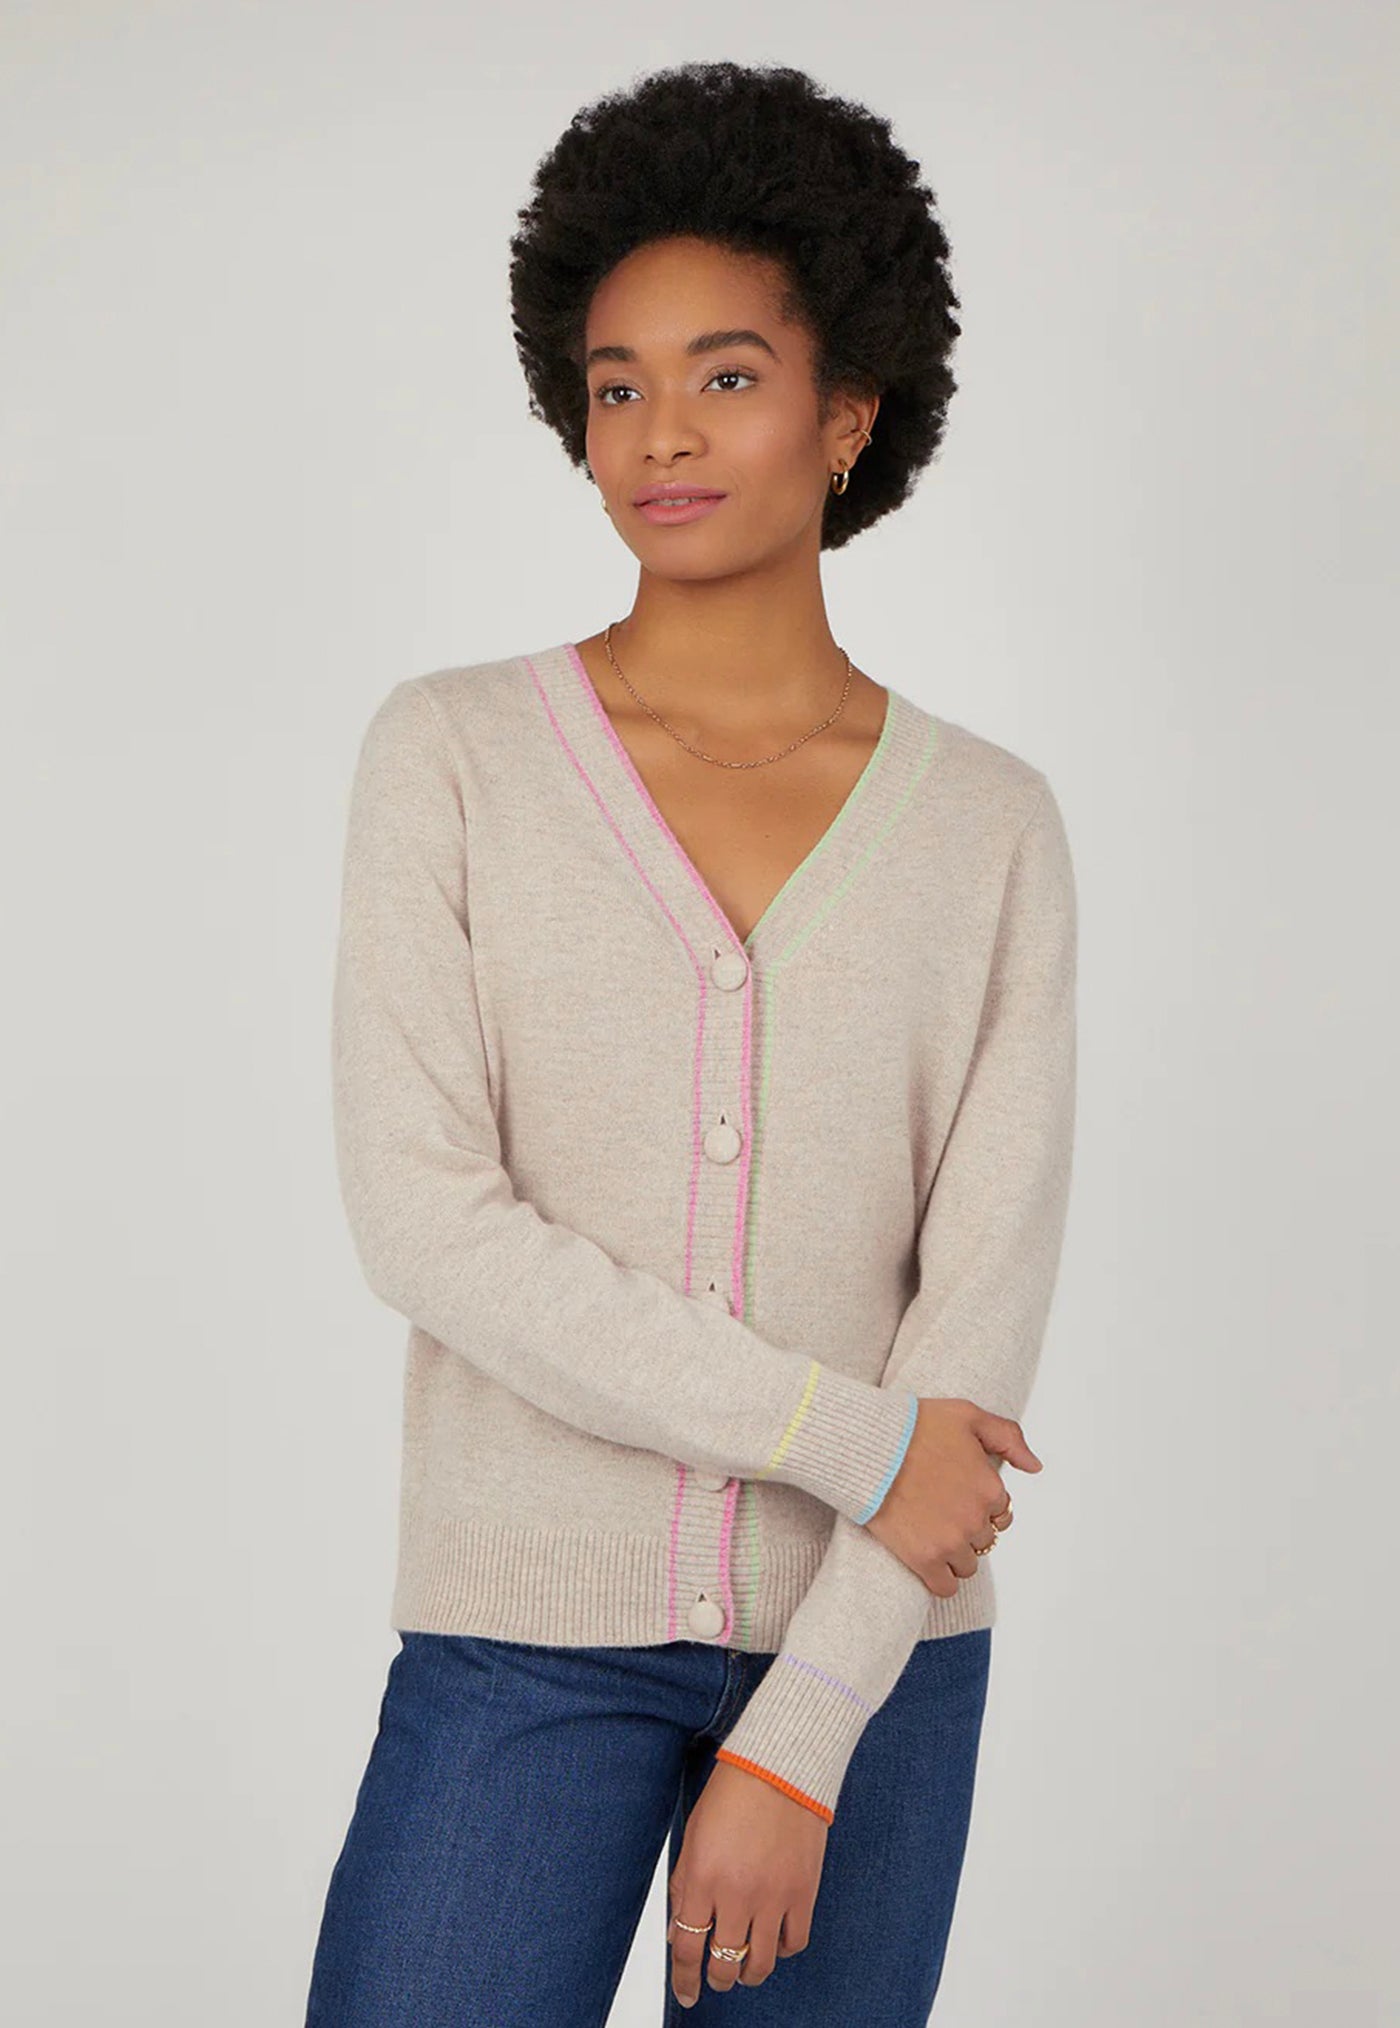 Fontana Cardigan - Natural Taupe sold by Angel Divine